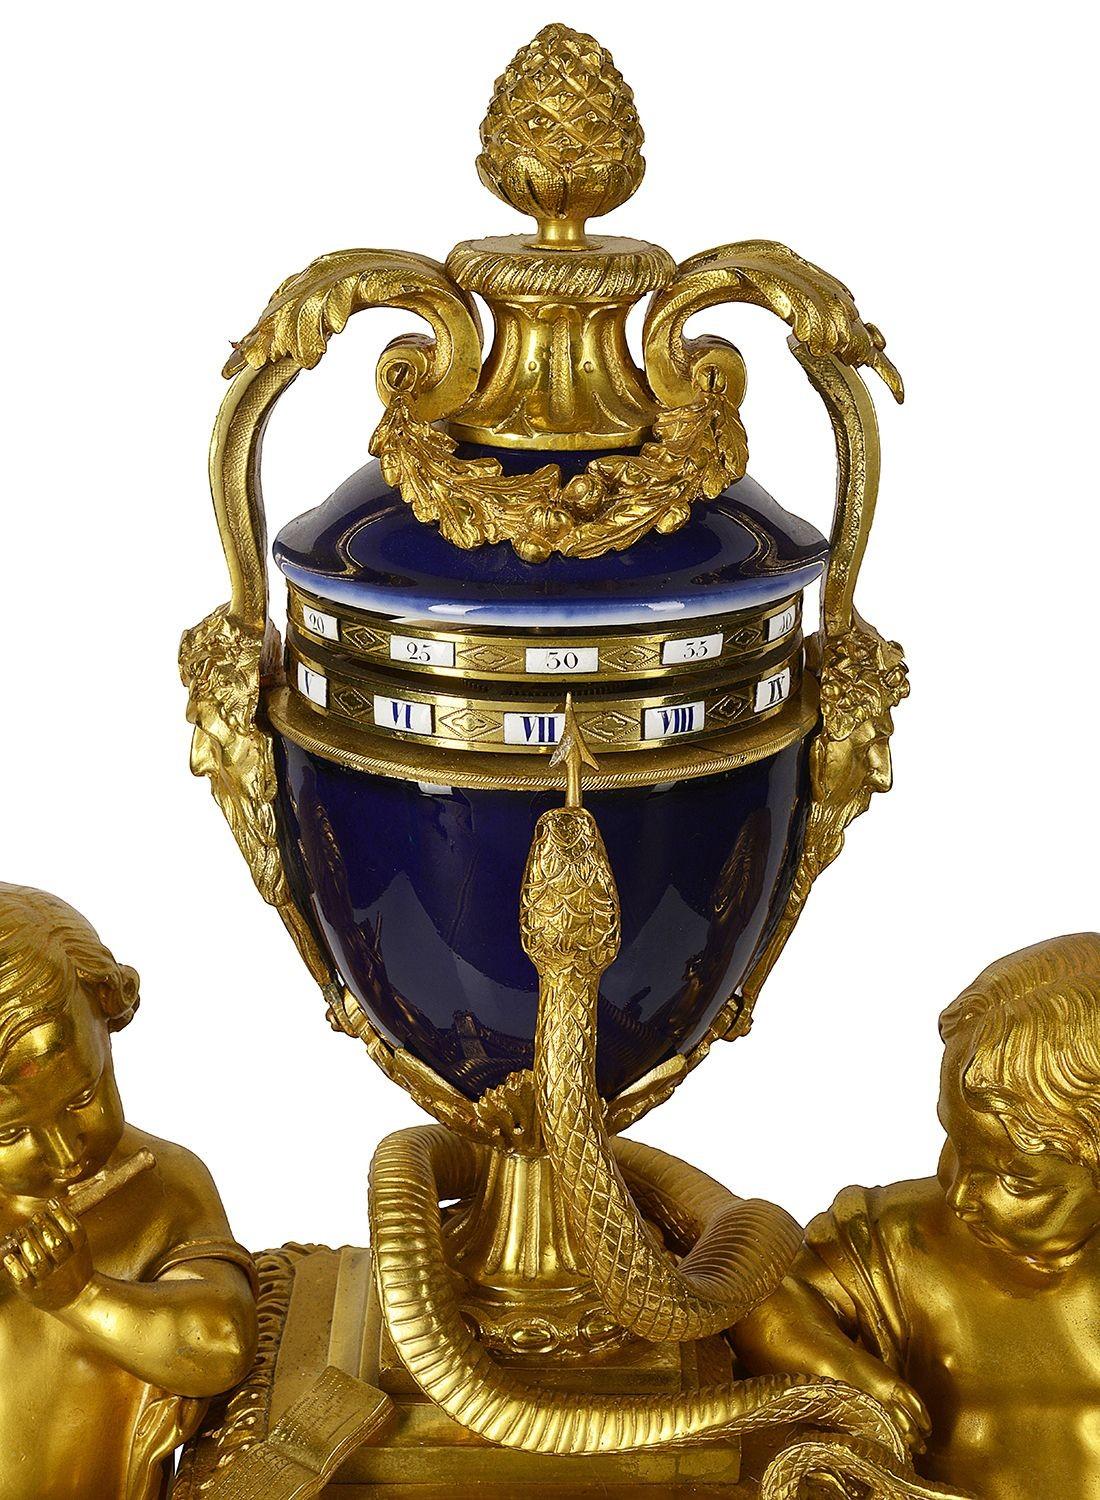 A wonderful late 19th century French Annular Louis XVI style gilded ormolu revolving mantel clock, depicting putti representing the arts and music, either side of a rotating tole urn with Roman enamel numerals and a Serpent that indicates the time.